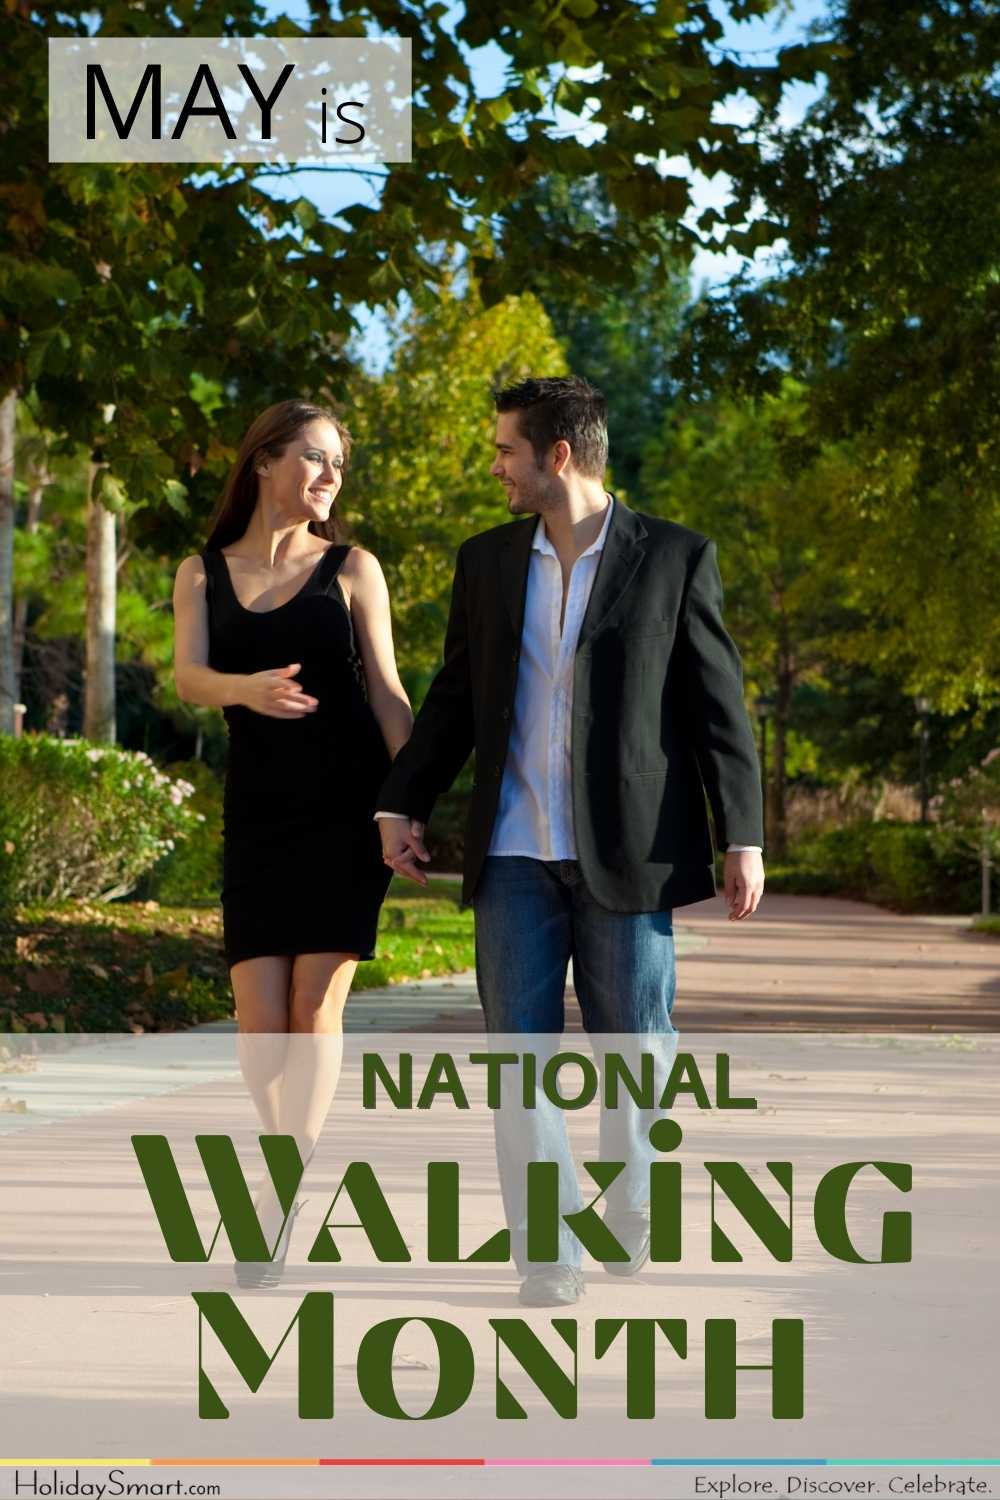  May is National Walking Month